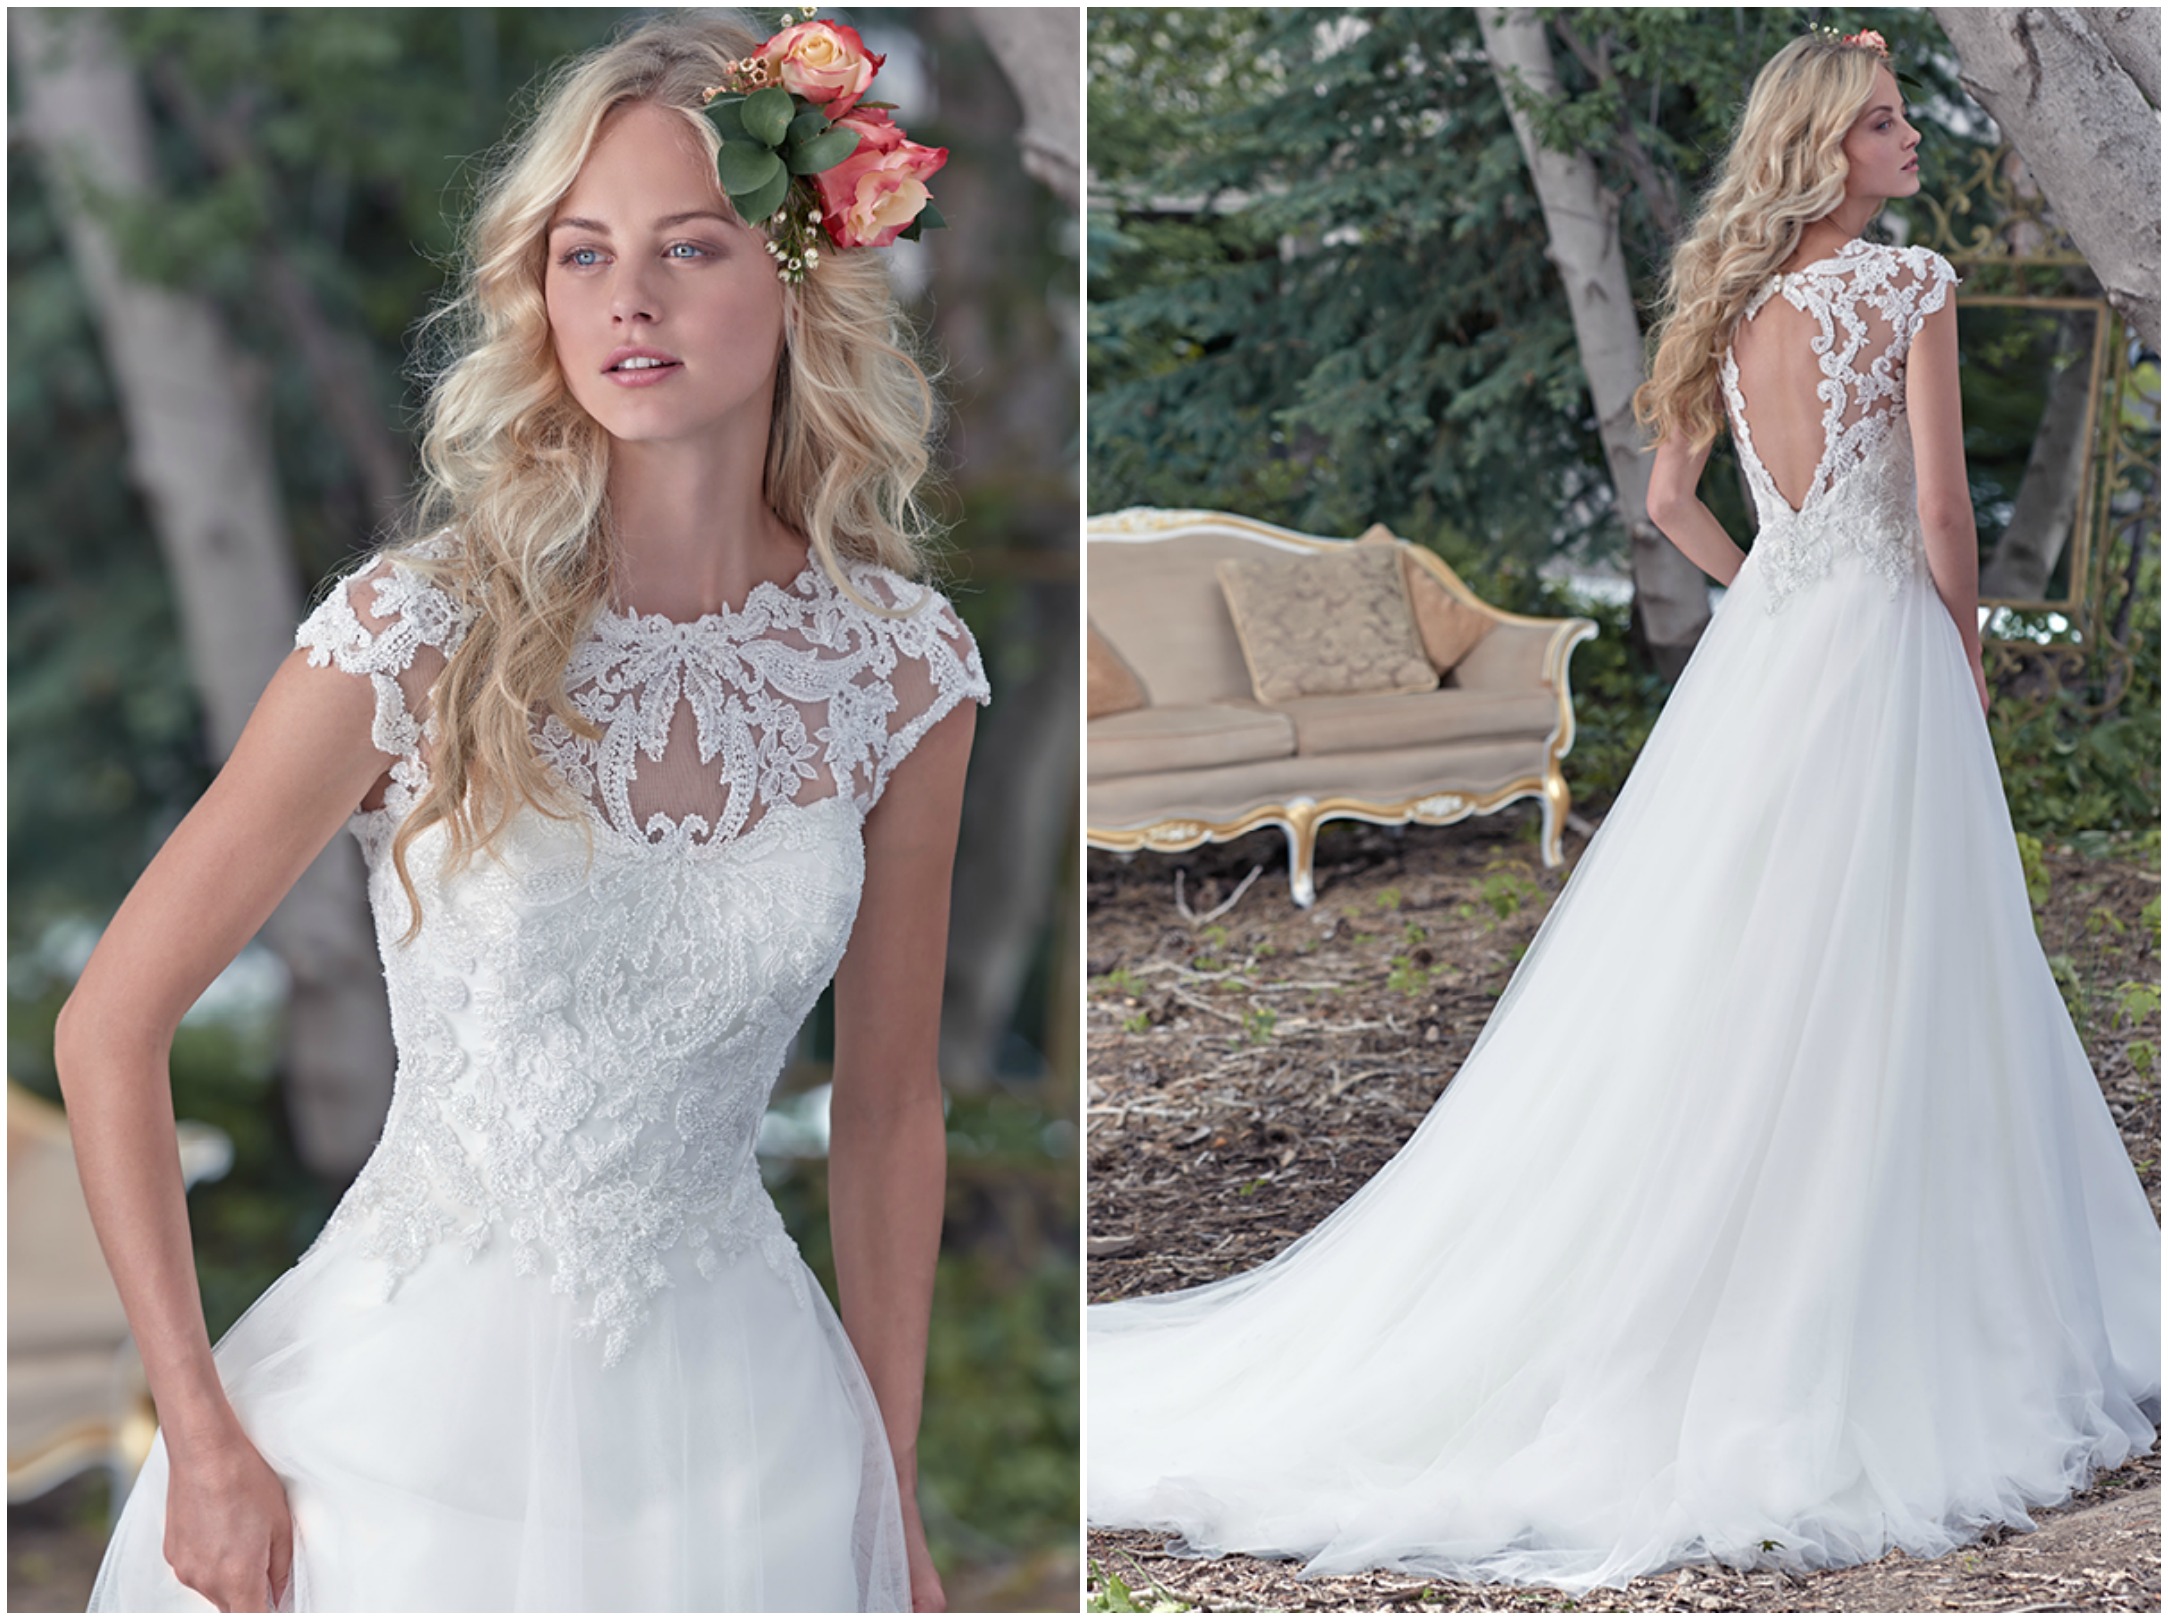 <a href="http://www.maggiesottero.com/maggie-sottero/chandler/9490" target="_blank">Maggie Sottero Spring 2016</a>